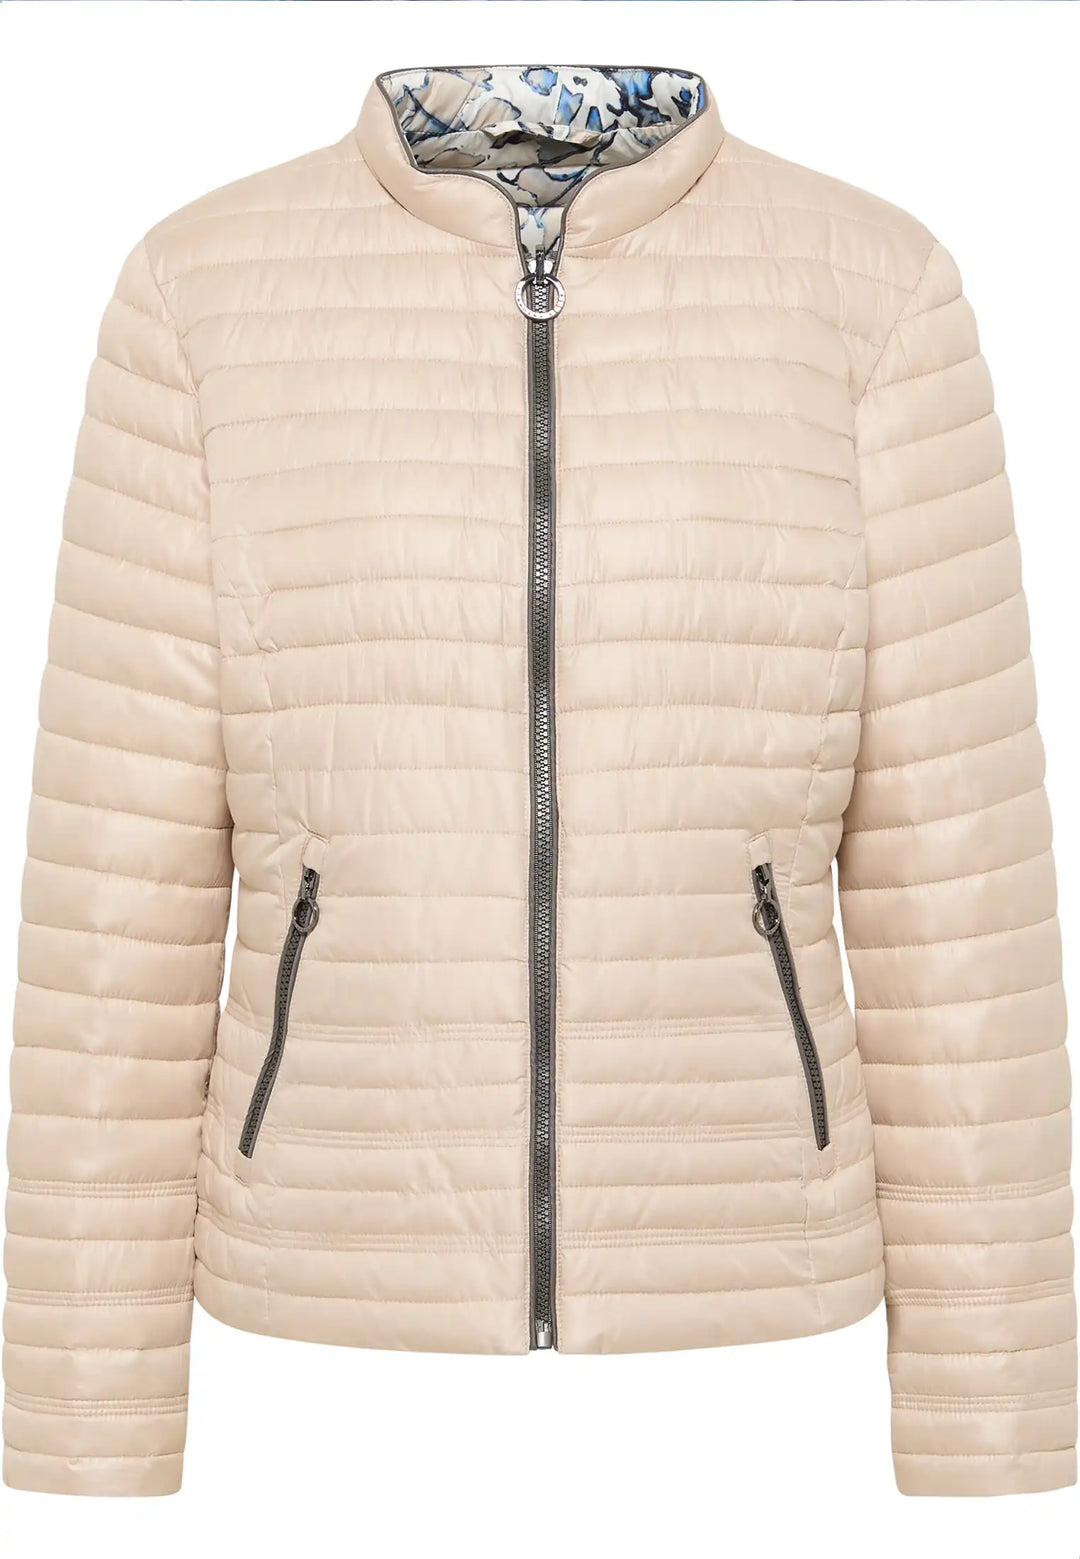 Reversible light beige jacket with patterned lining, featuring zip fastening, side pockets, and a classic collar for a stylish, adaptable outerwear option, style 55010042-215